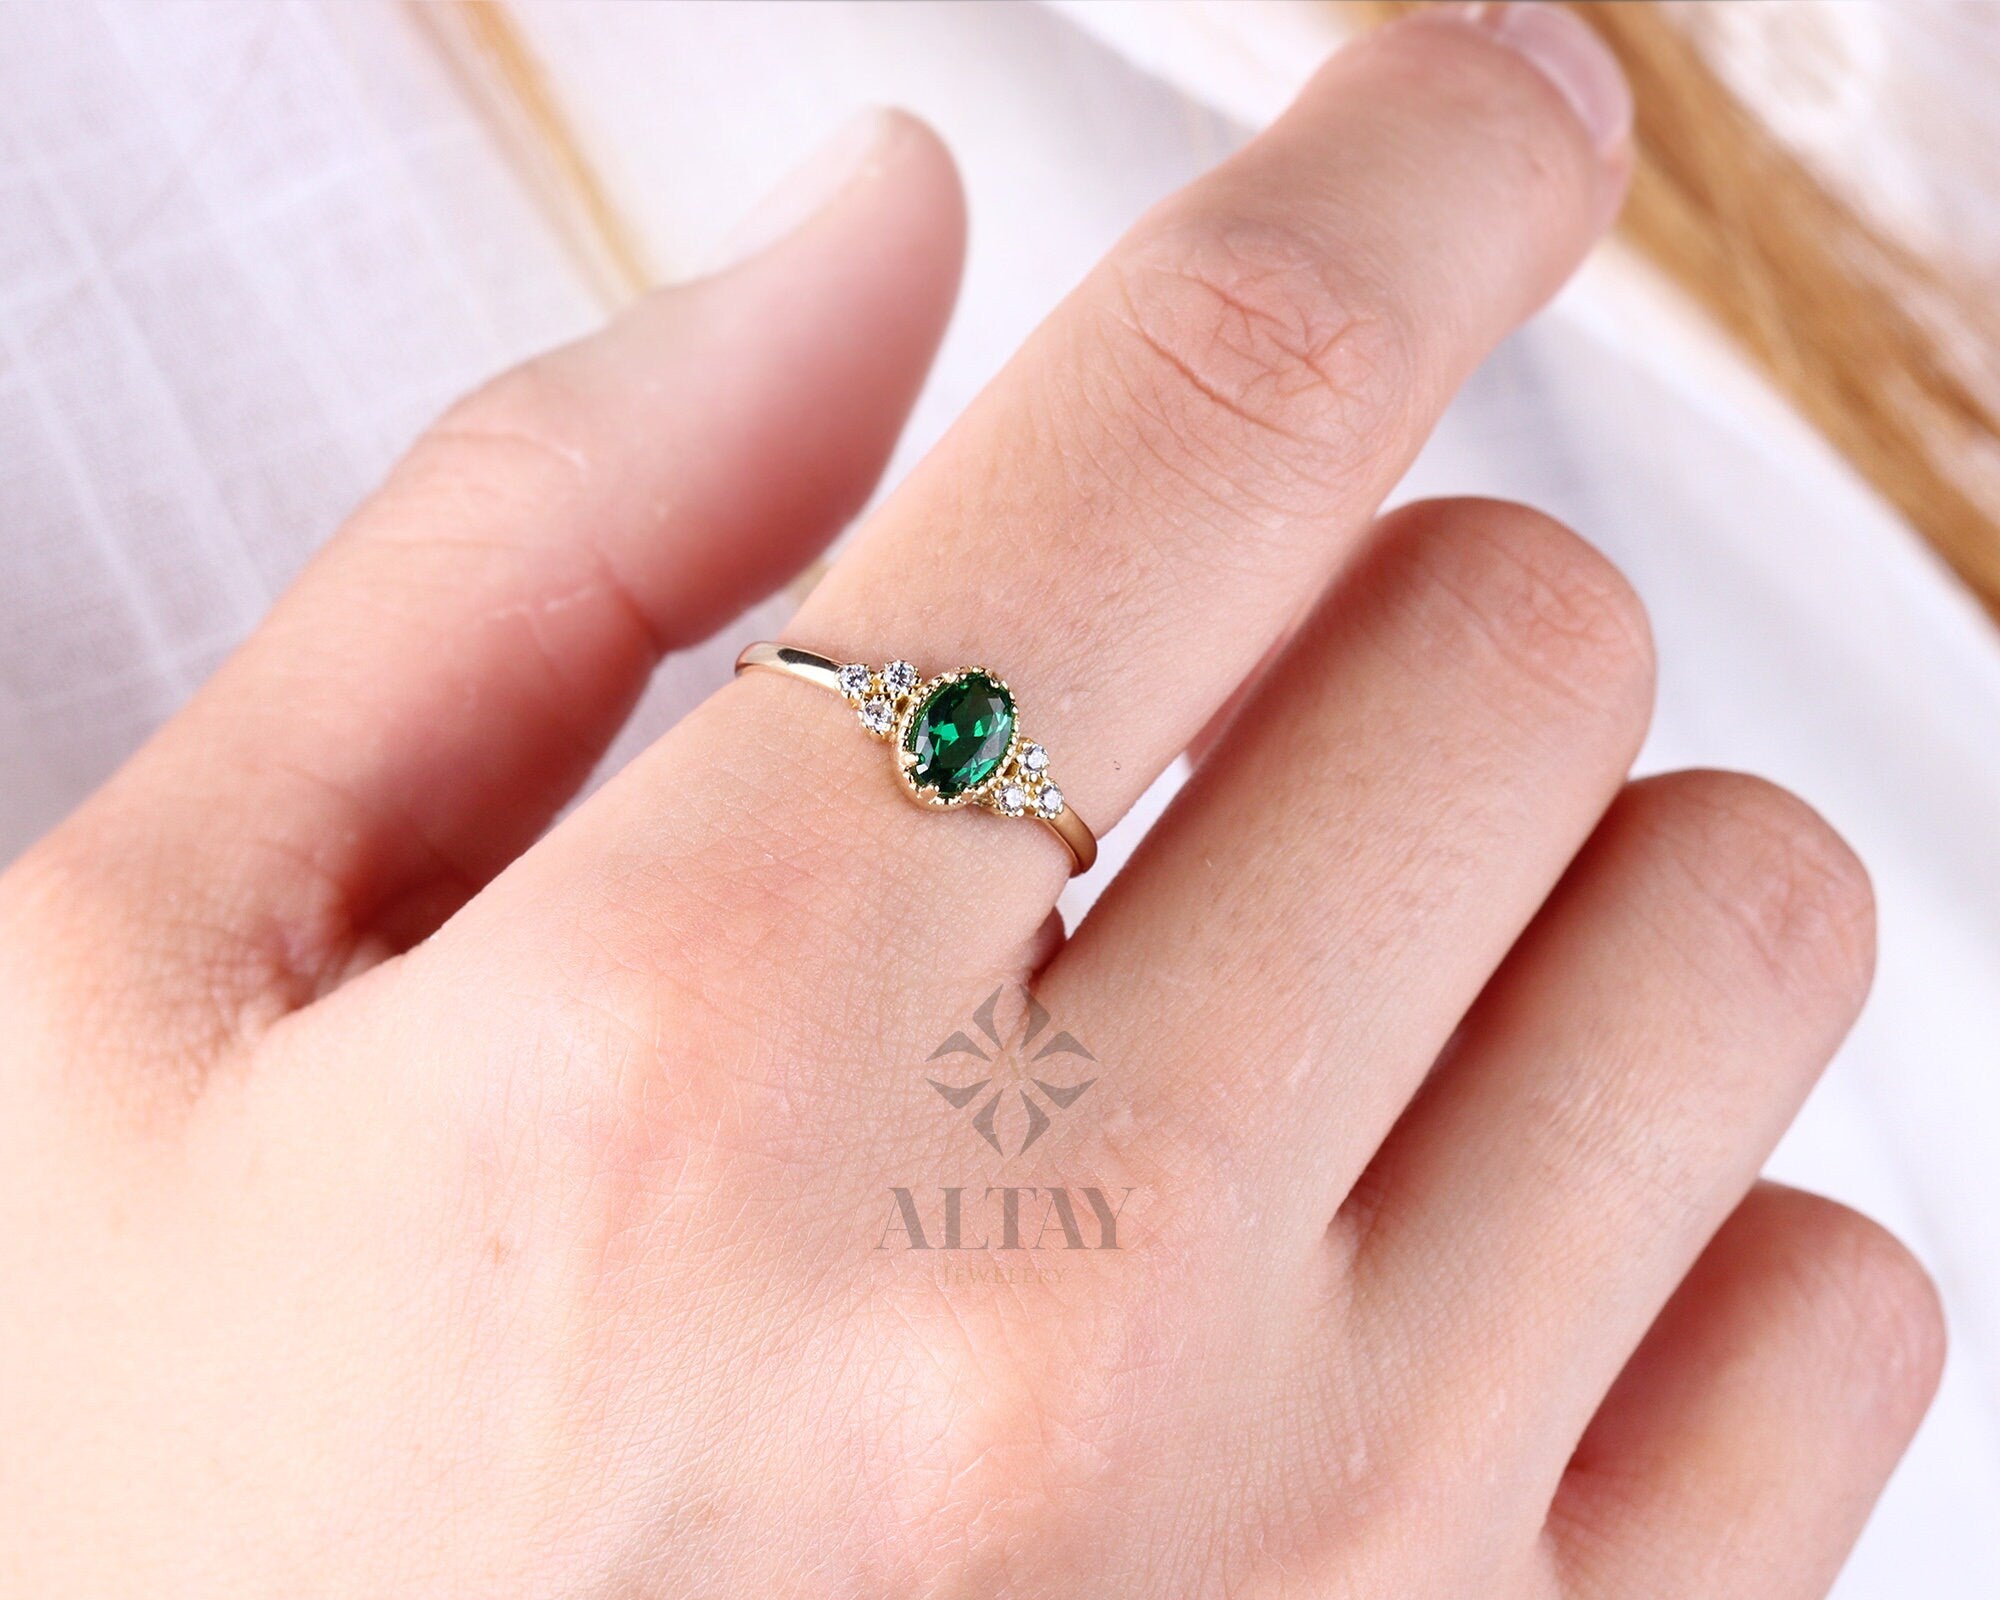 14K Gold Emerald Ring, Emerald Engagement Diamond Ring, Oval Cut Emerald Diamond Ring, Promise Ring, May Birthstone Solitaire Ring, Gift